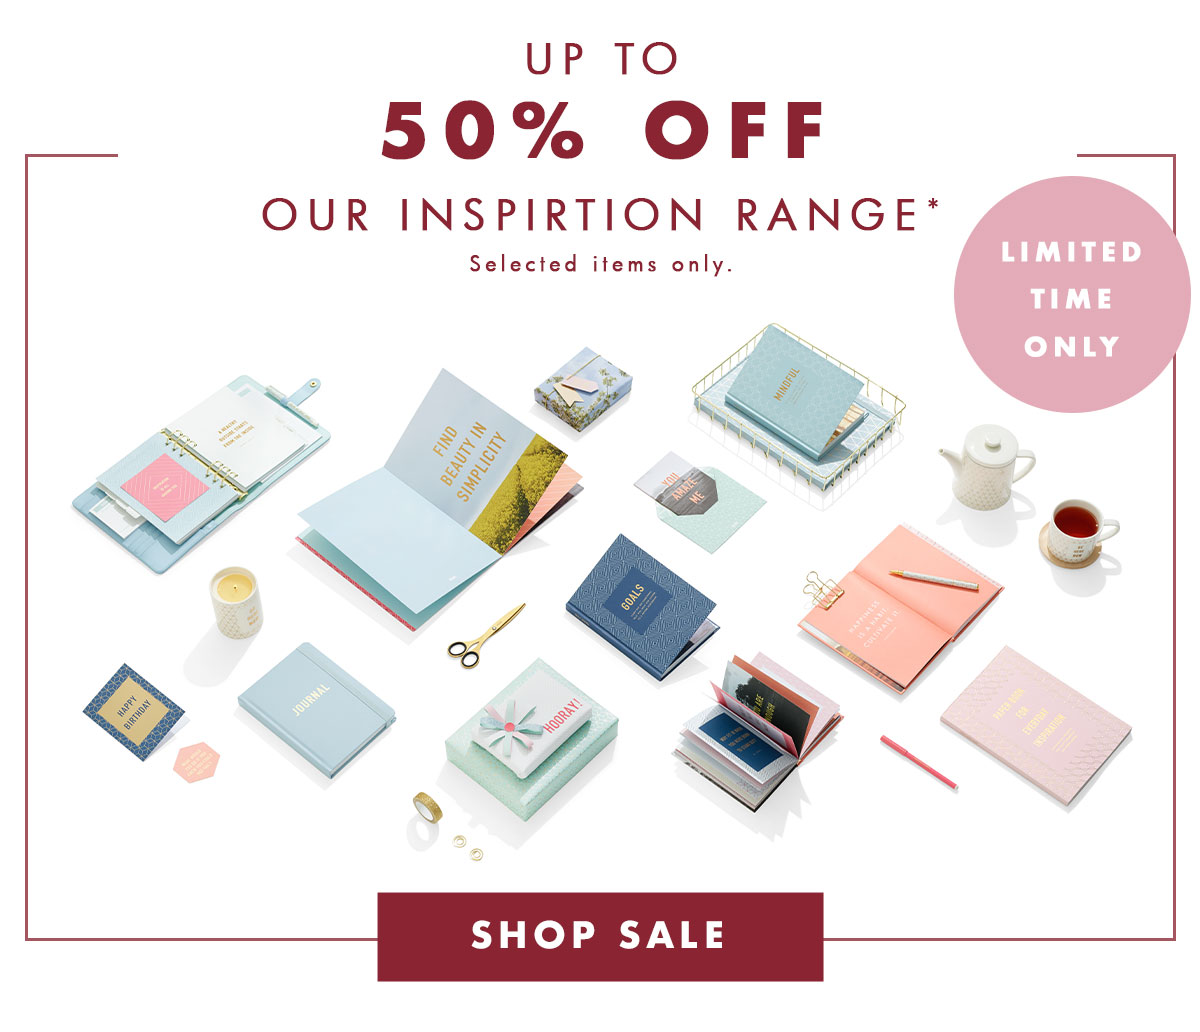 Limited time only. Up to 50% off our Inspiration range*. Shop sale.